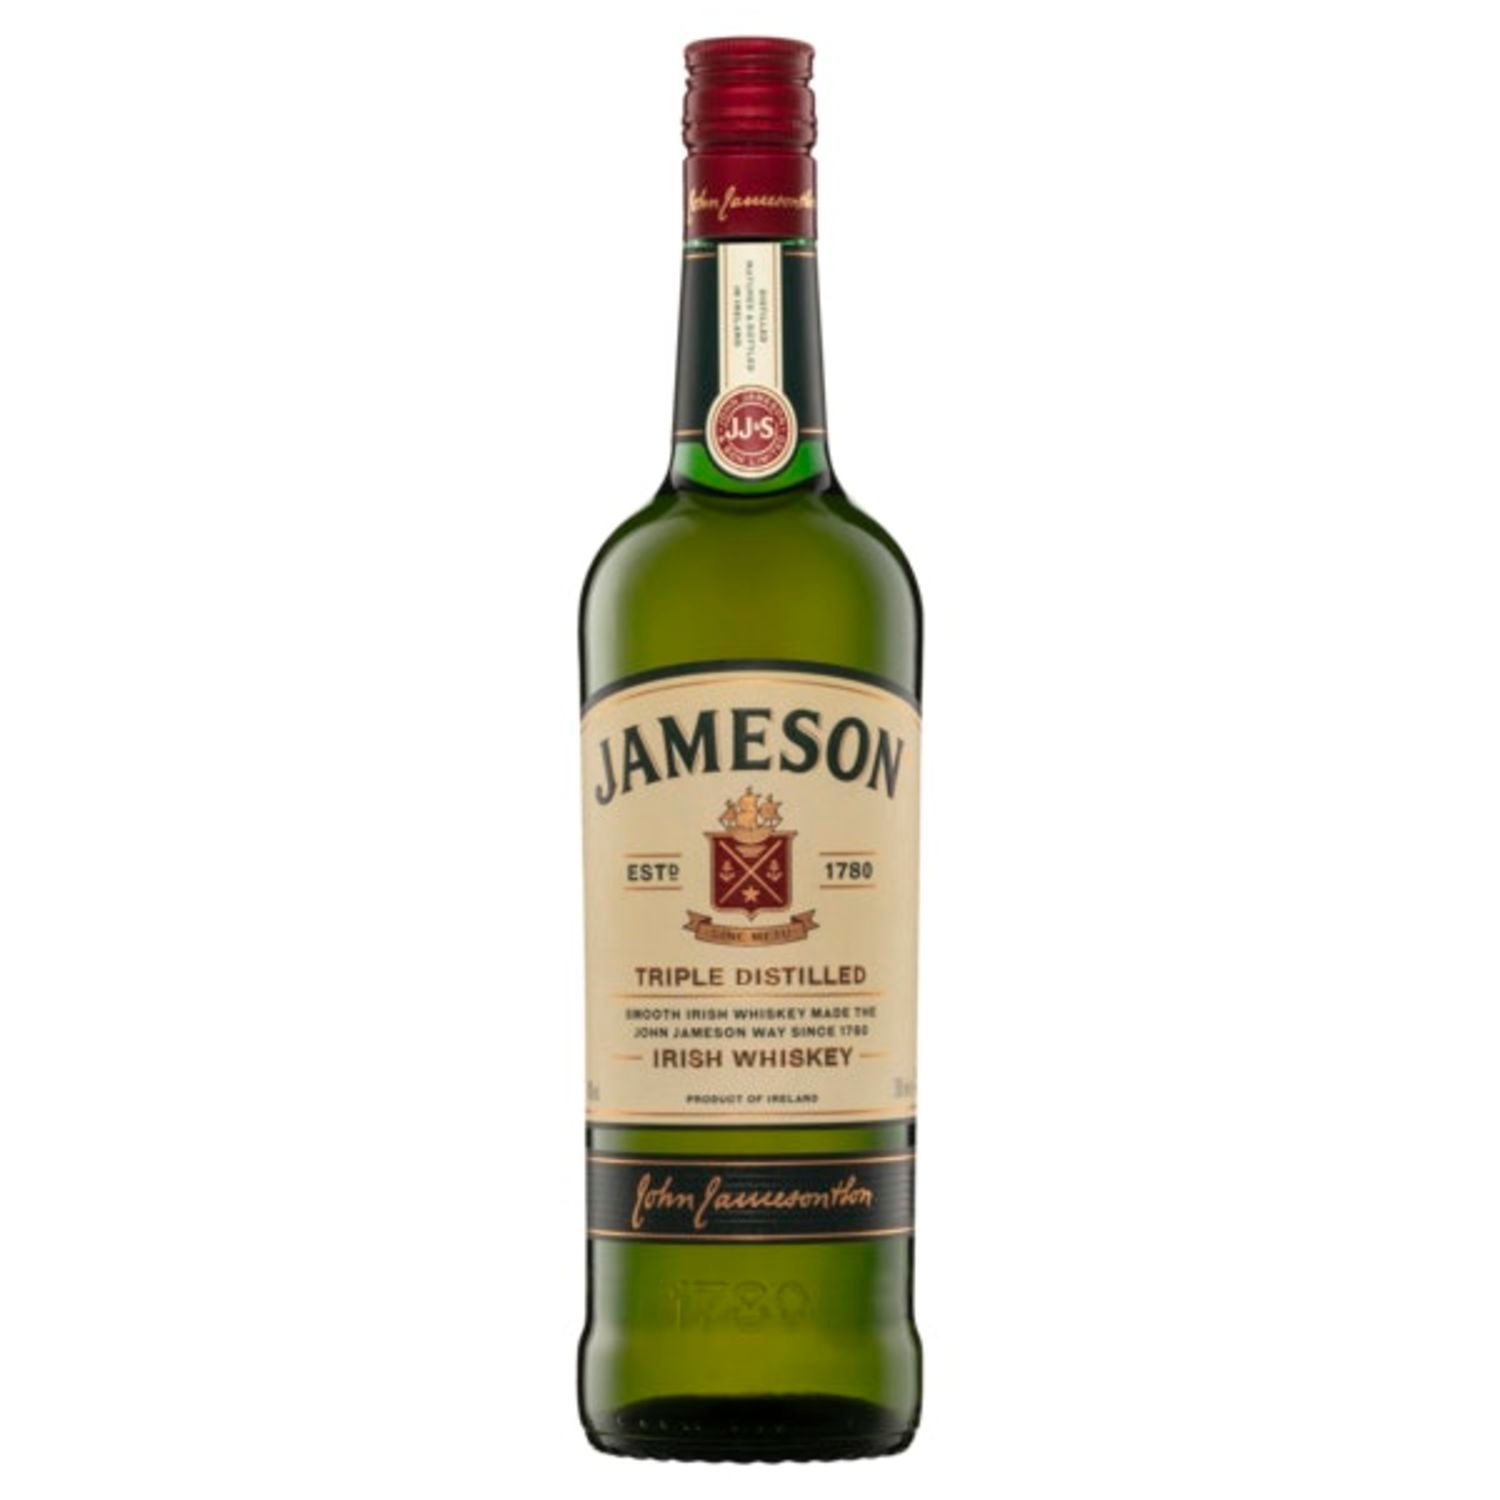 The largest selling Irish whiskey in the world today, Jameson has been around since 1780. Produced using unmalted grain and matured in bourbon and oloroso sherry casks for between 4 and 7 years. Jameson has a light and delicate flavour and a wonderfully smooth texture.<br /> <br />Alcohol Volume: 40.00%<br /><br />Pack Format: Bottle<br /><br />Standard Drinks: 22</br /><br />Pack Type: Bottle<br /><br />Country of Origin: Ireland<br />